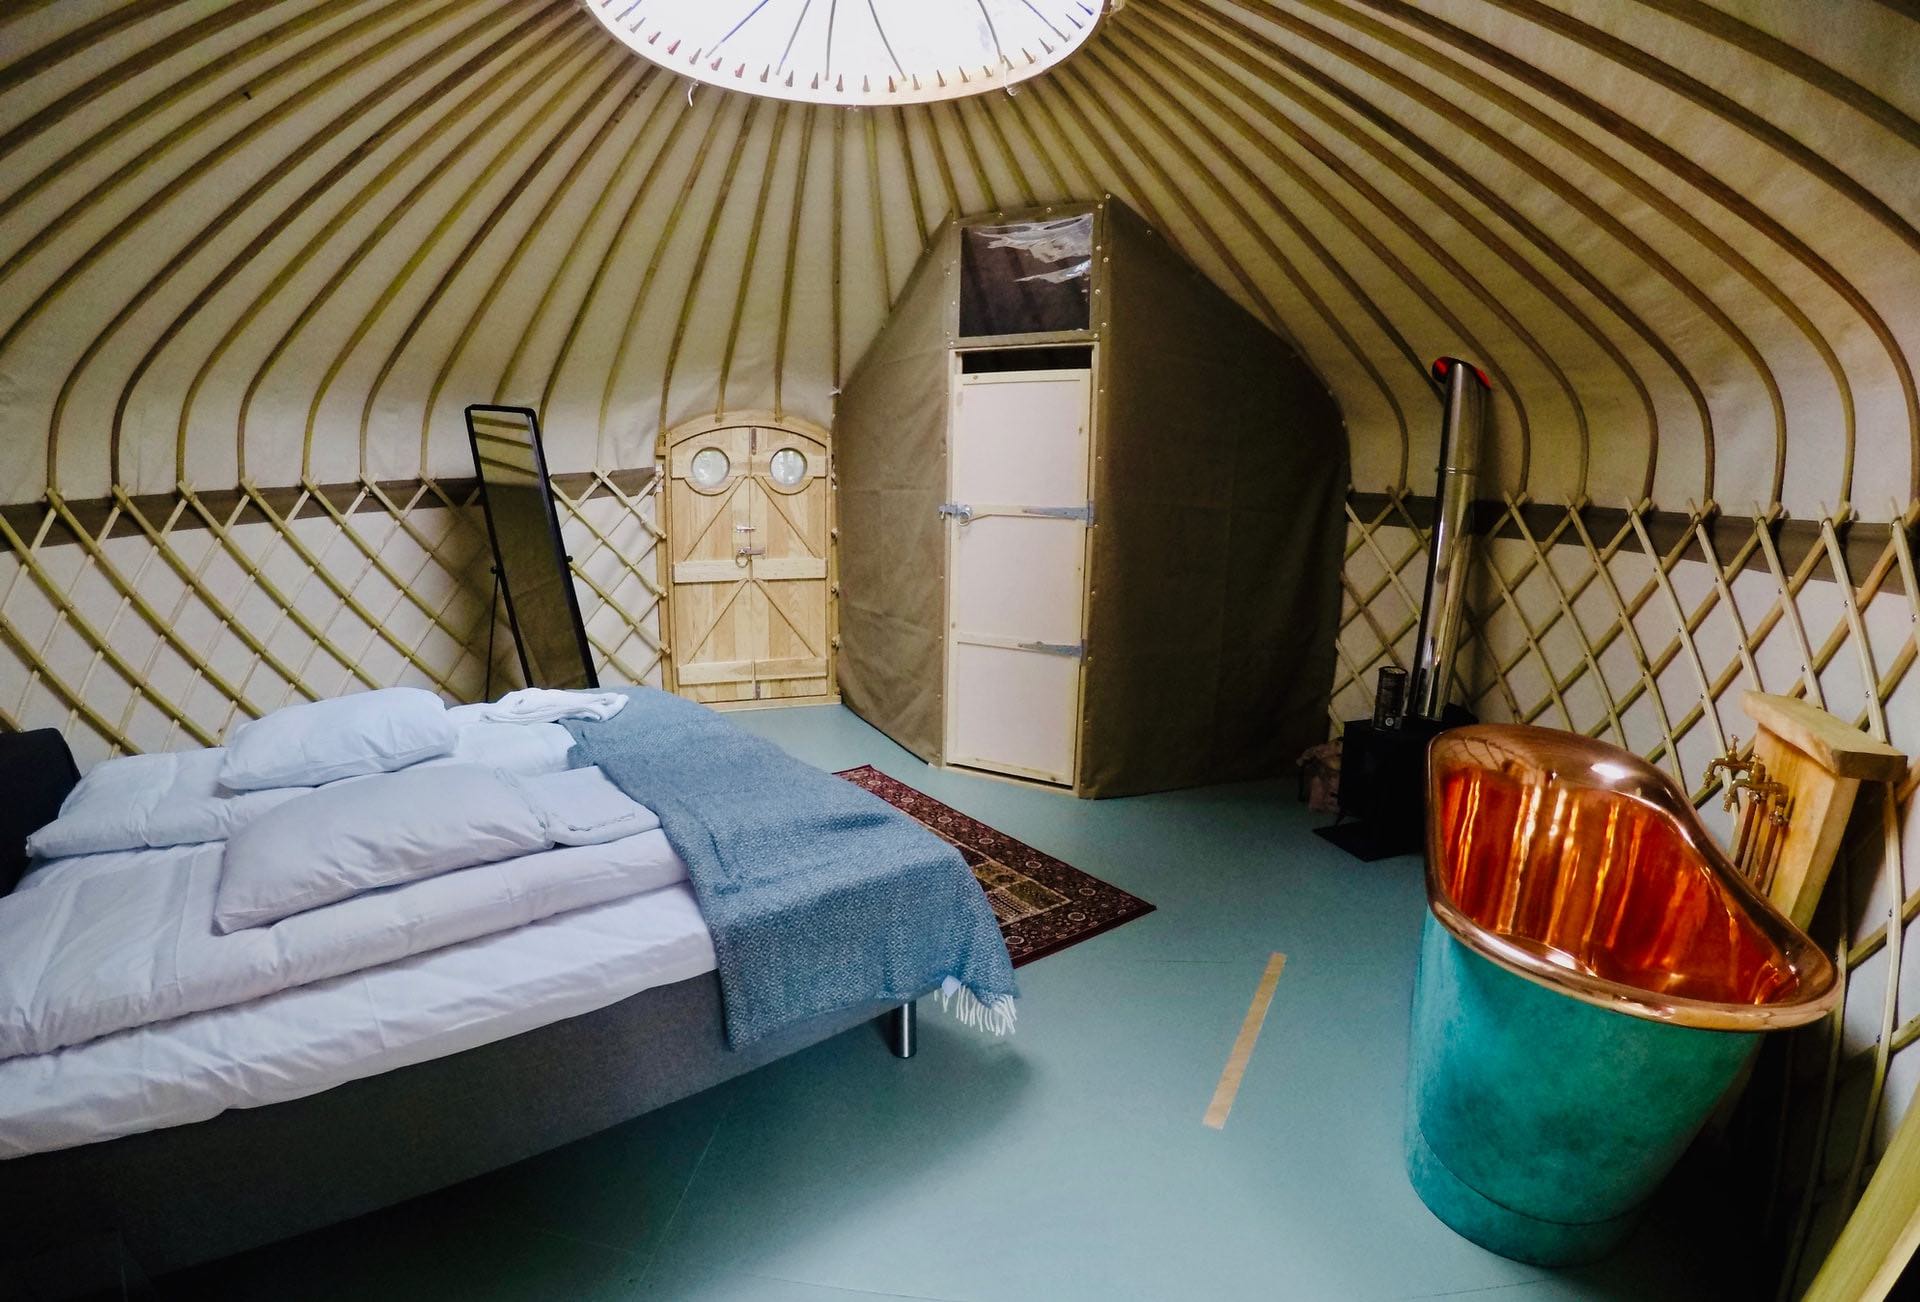 Yurts are a unique and comfortable glamping model, and can even be equipped with running water and heating. 